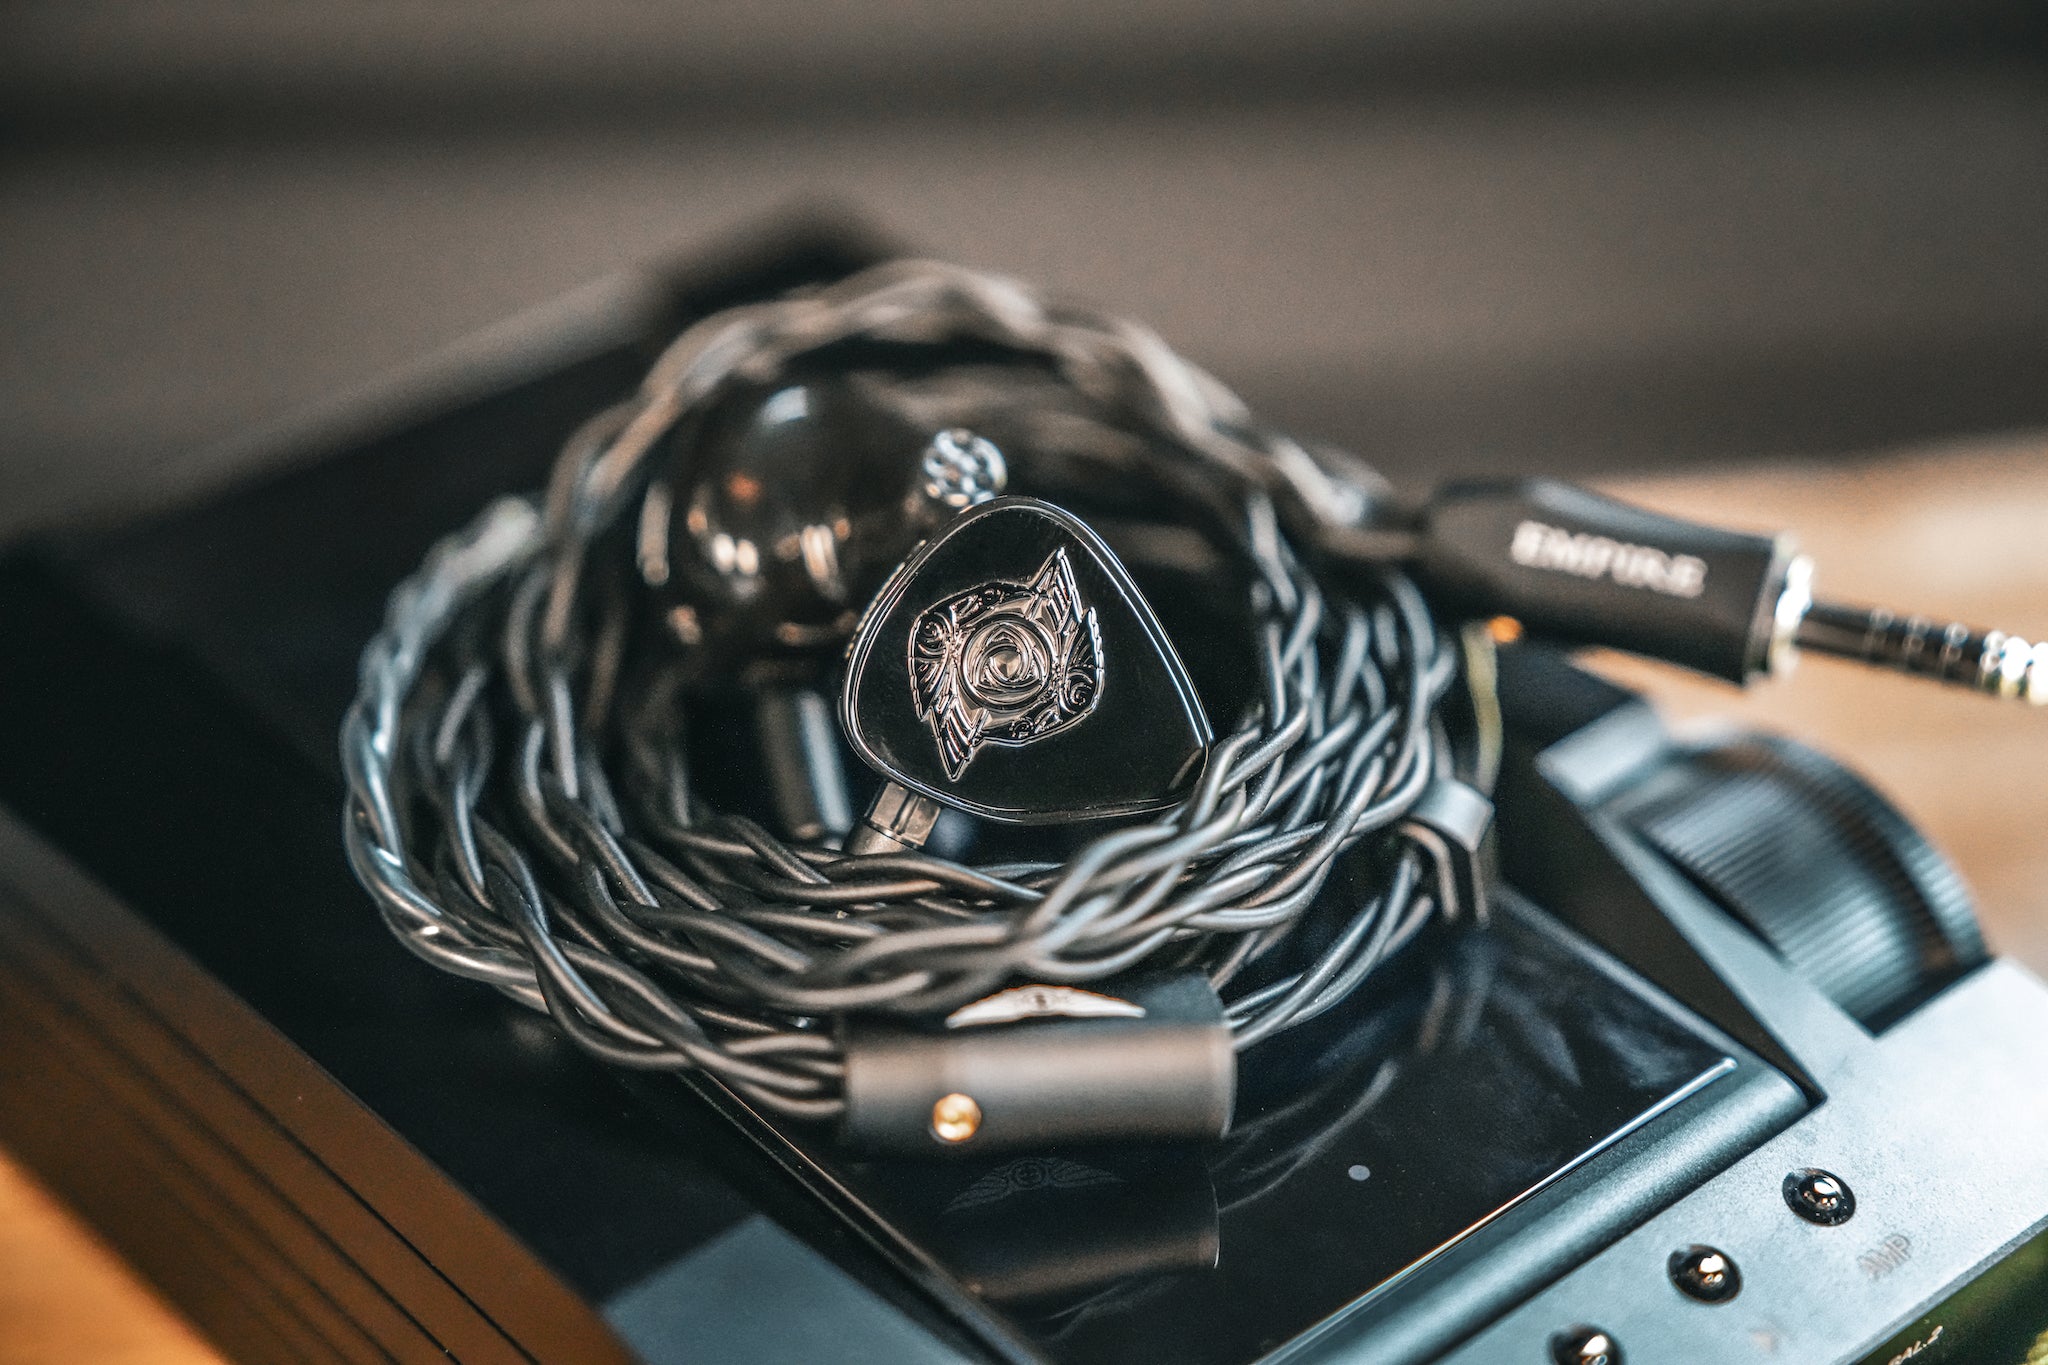 Empire Ears Raven black earphones with attached coiled stock cable on top of Astell Kern ACRO CA1000T DAP from Bloom Audio gallery